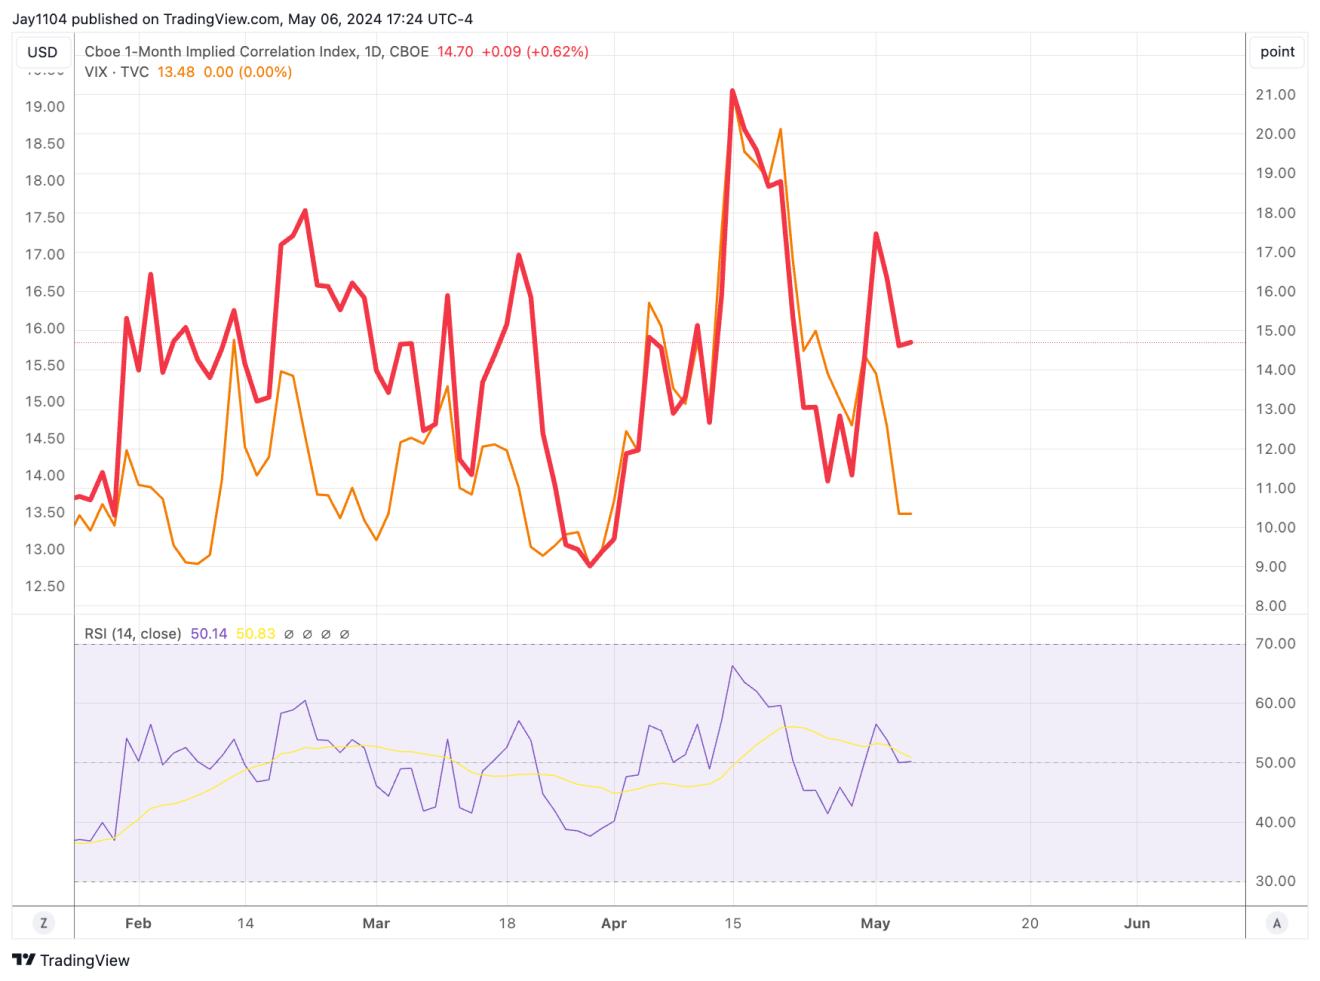 CBOE 1-Month Implied Correlation Index-Daily Chart